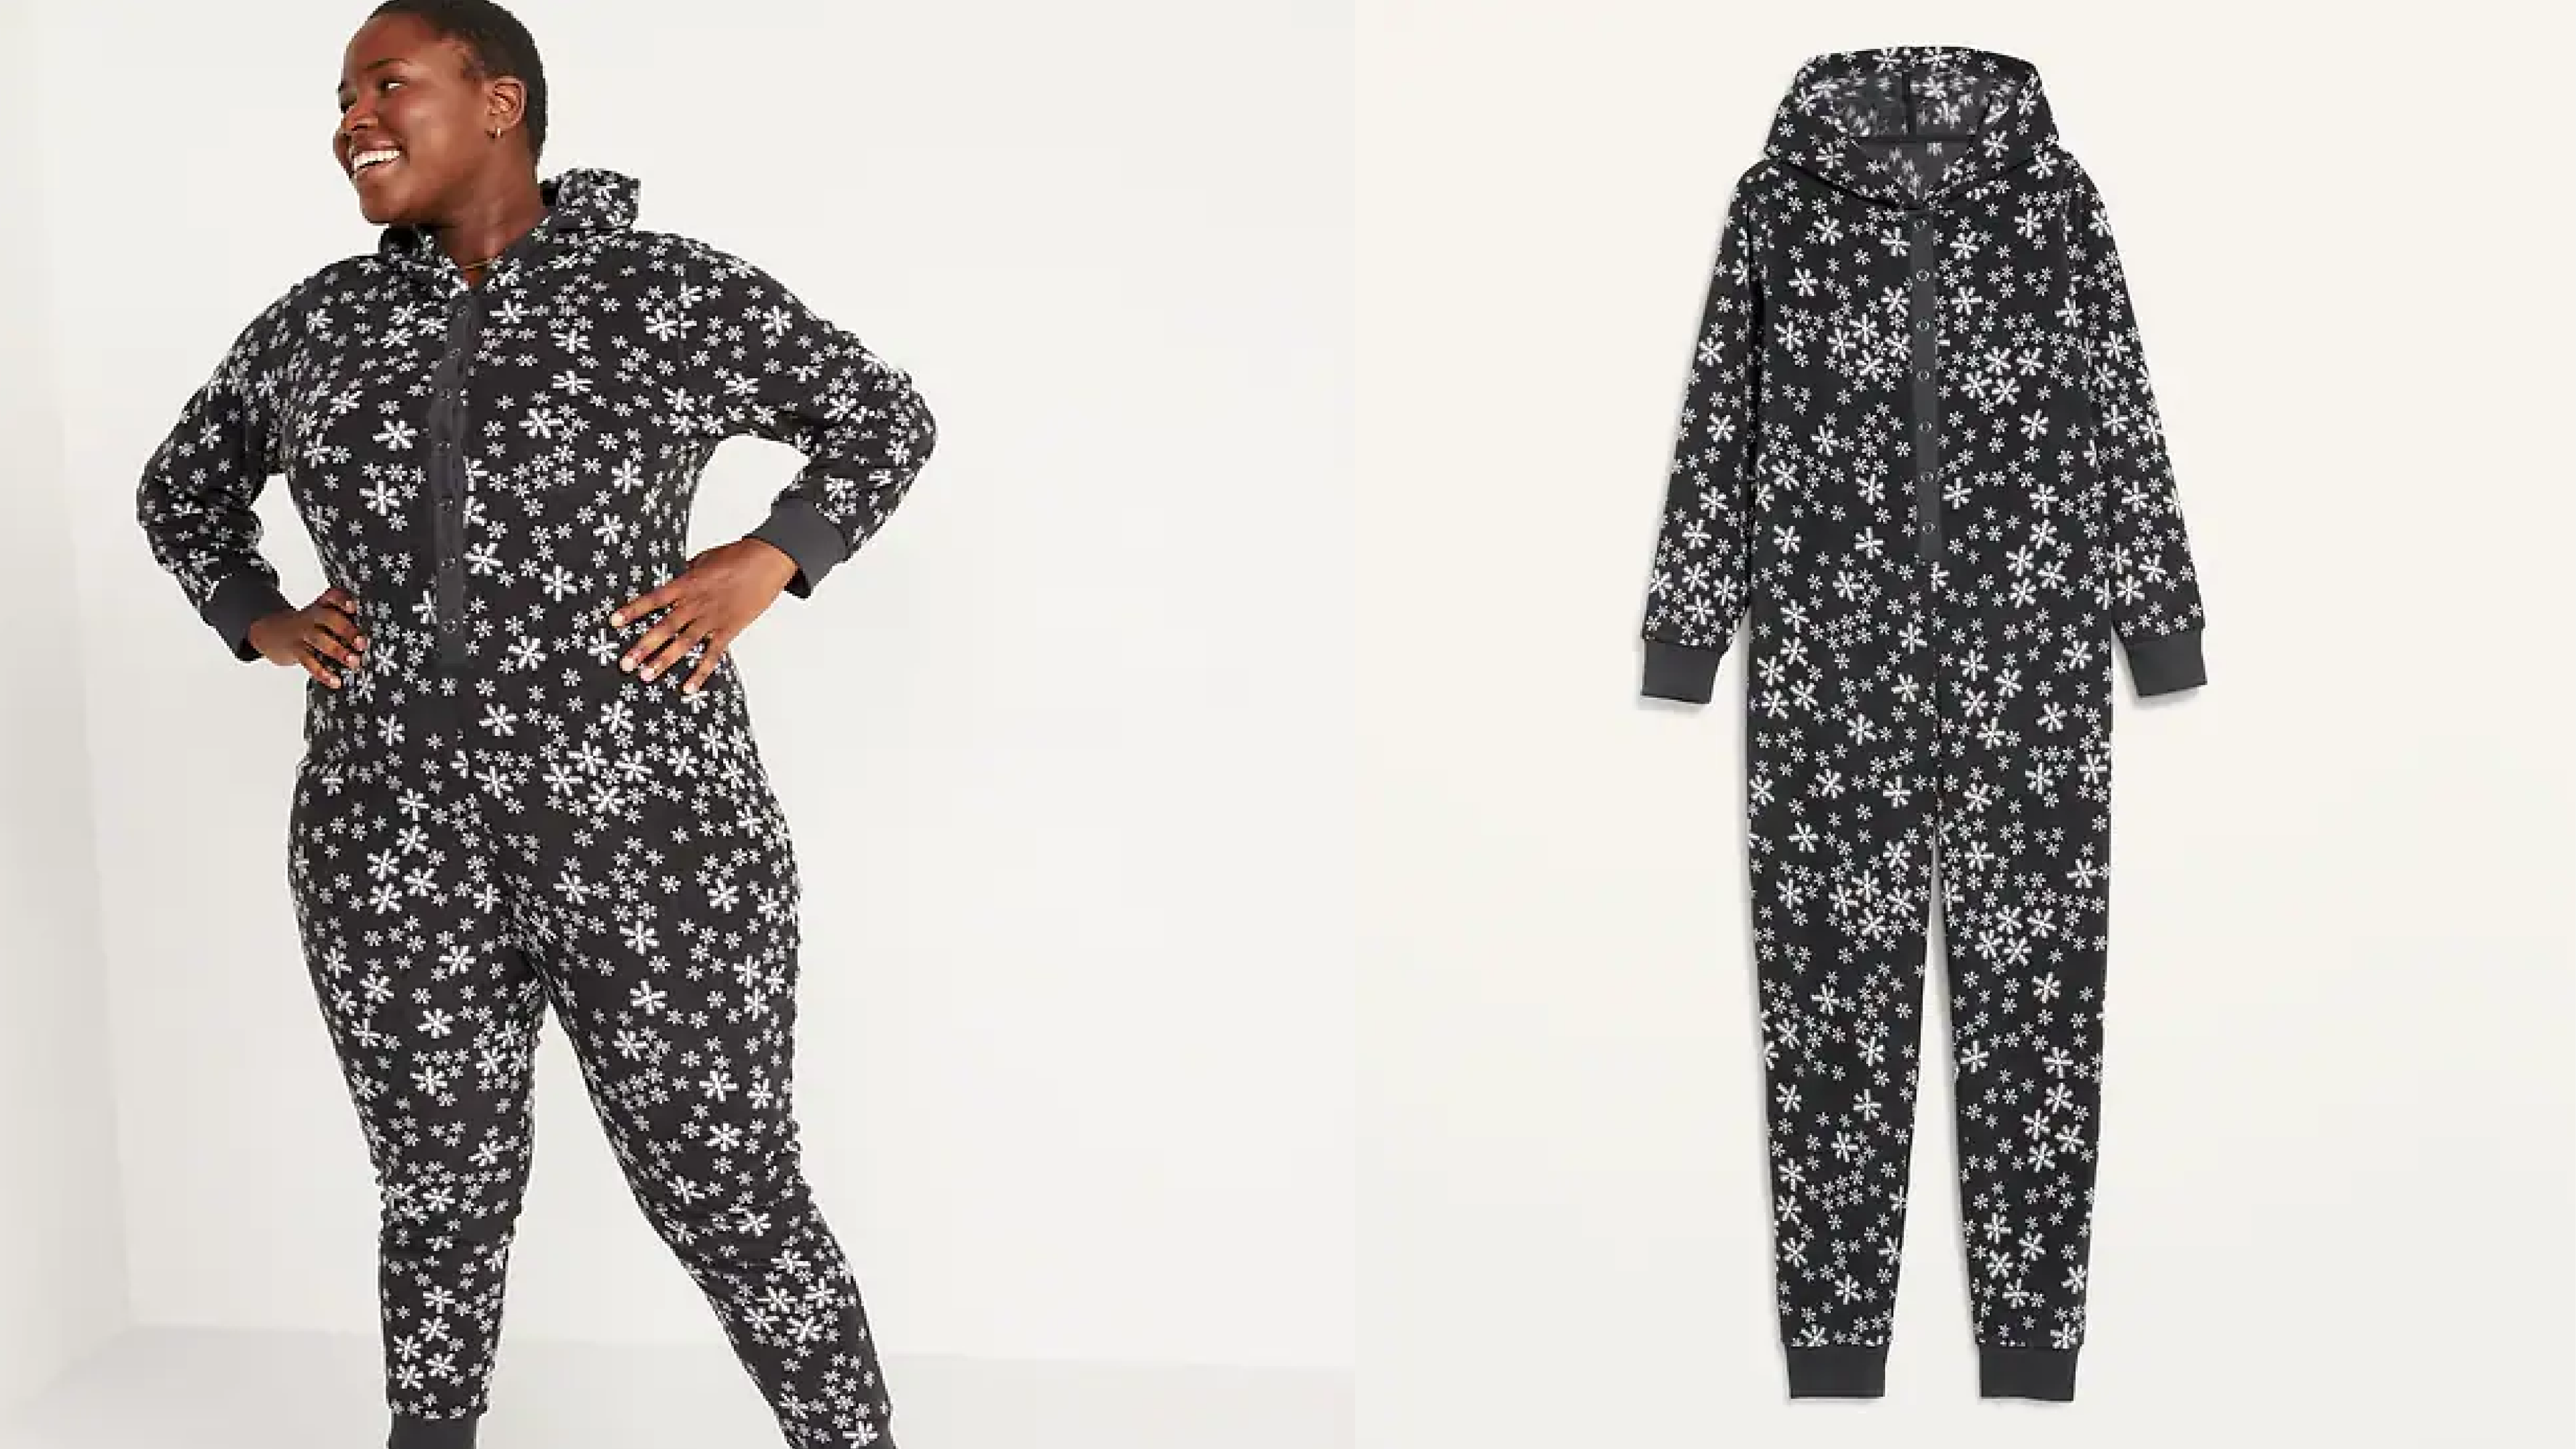 Woman wearing onesie covered in snow flakes